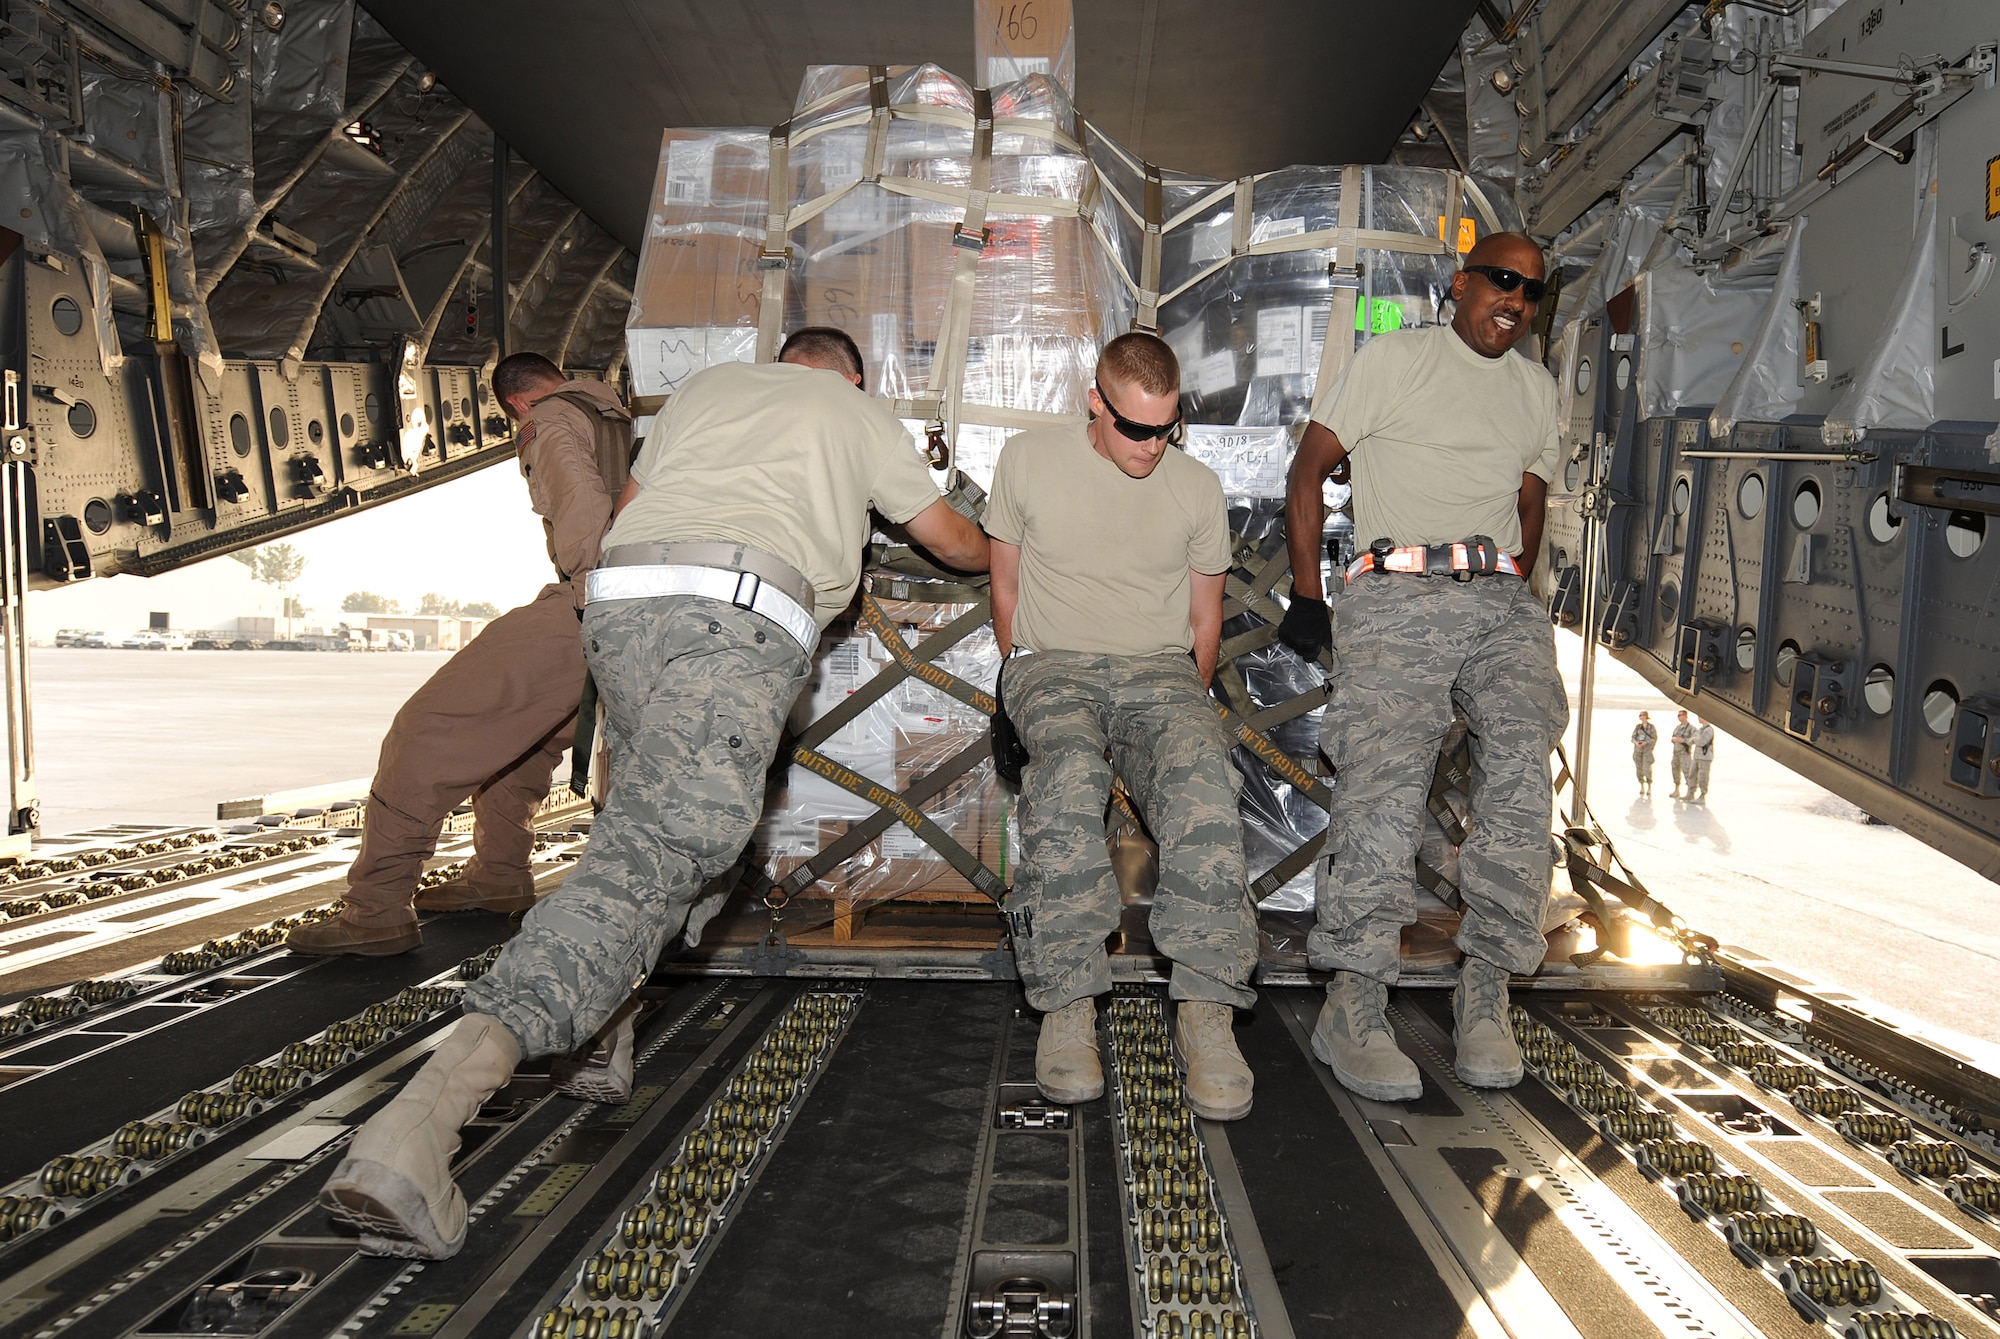 Airmen from the 451st Aerial Port Flight push a cargo pallet during an engine-running offload of a C-17 Globemaster III Sept. 29, 2010, at Kandahar Airfield, Afghanistan. The 451st APF handled more than 26 million pounds of cargo in the month of September. (U.S. Air Force photo by Tech. Sgt. Chad Chisholm/Released)